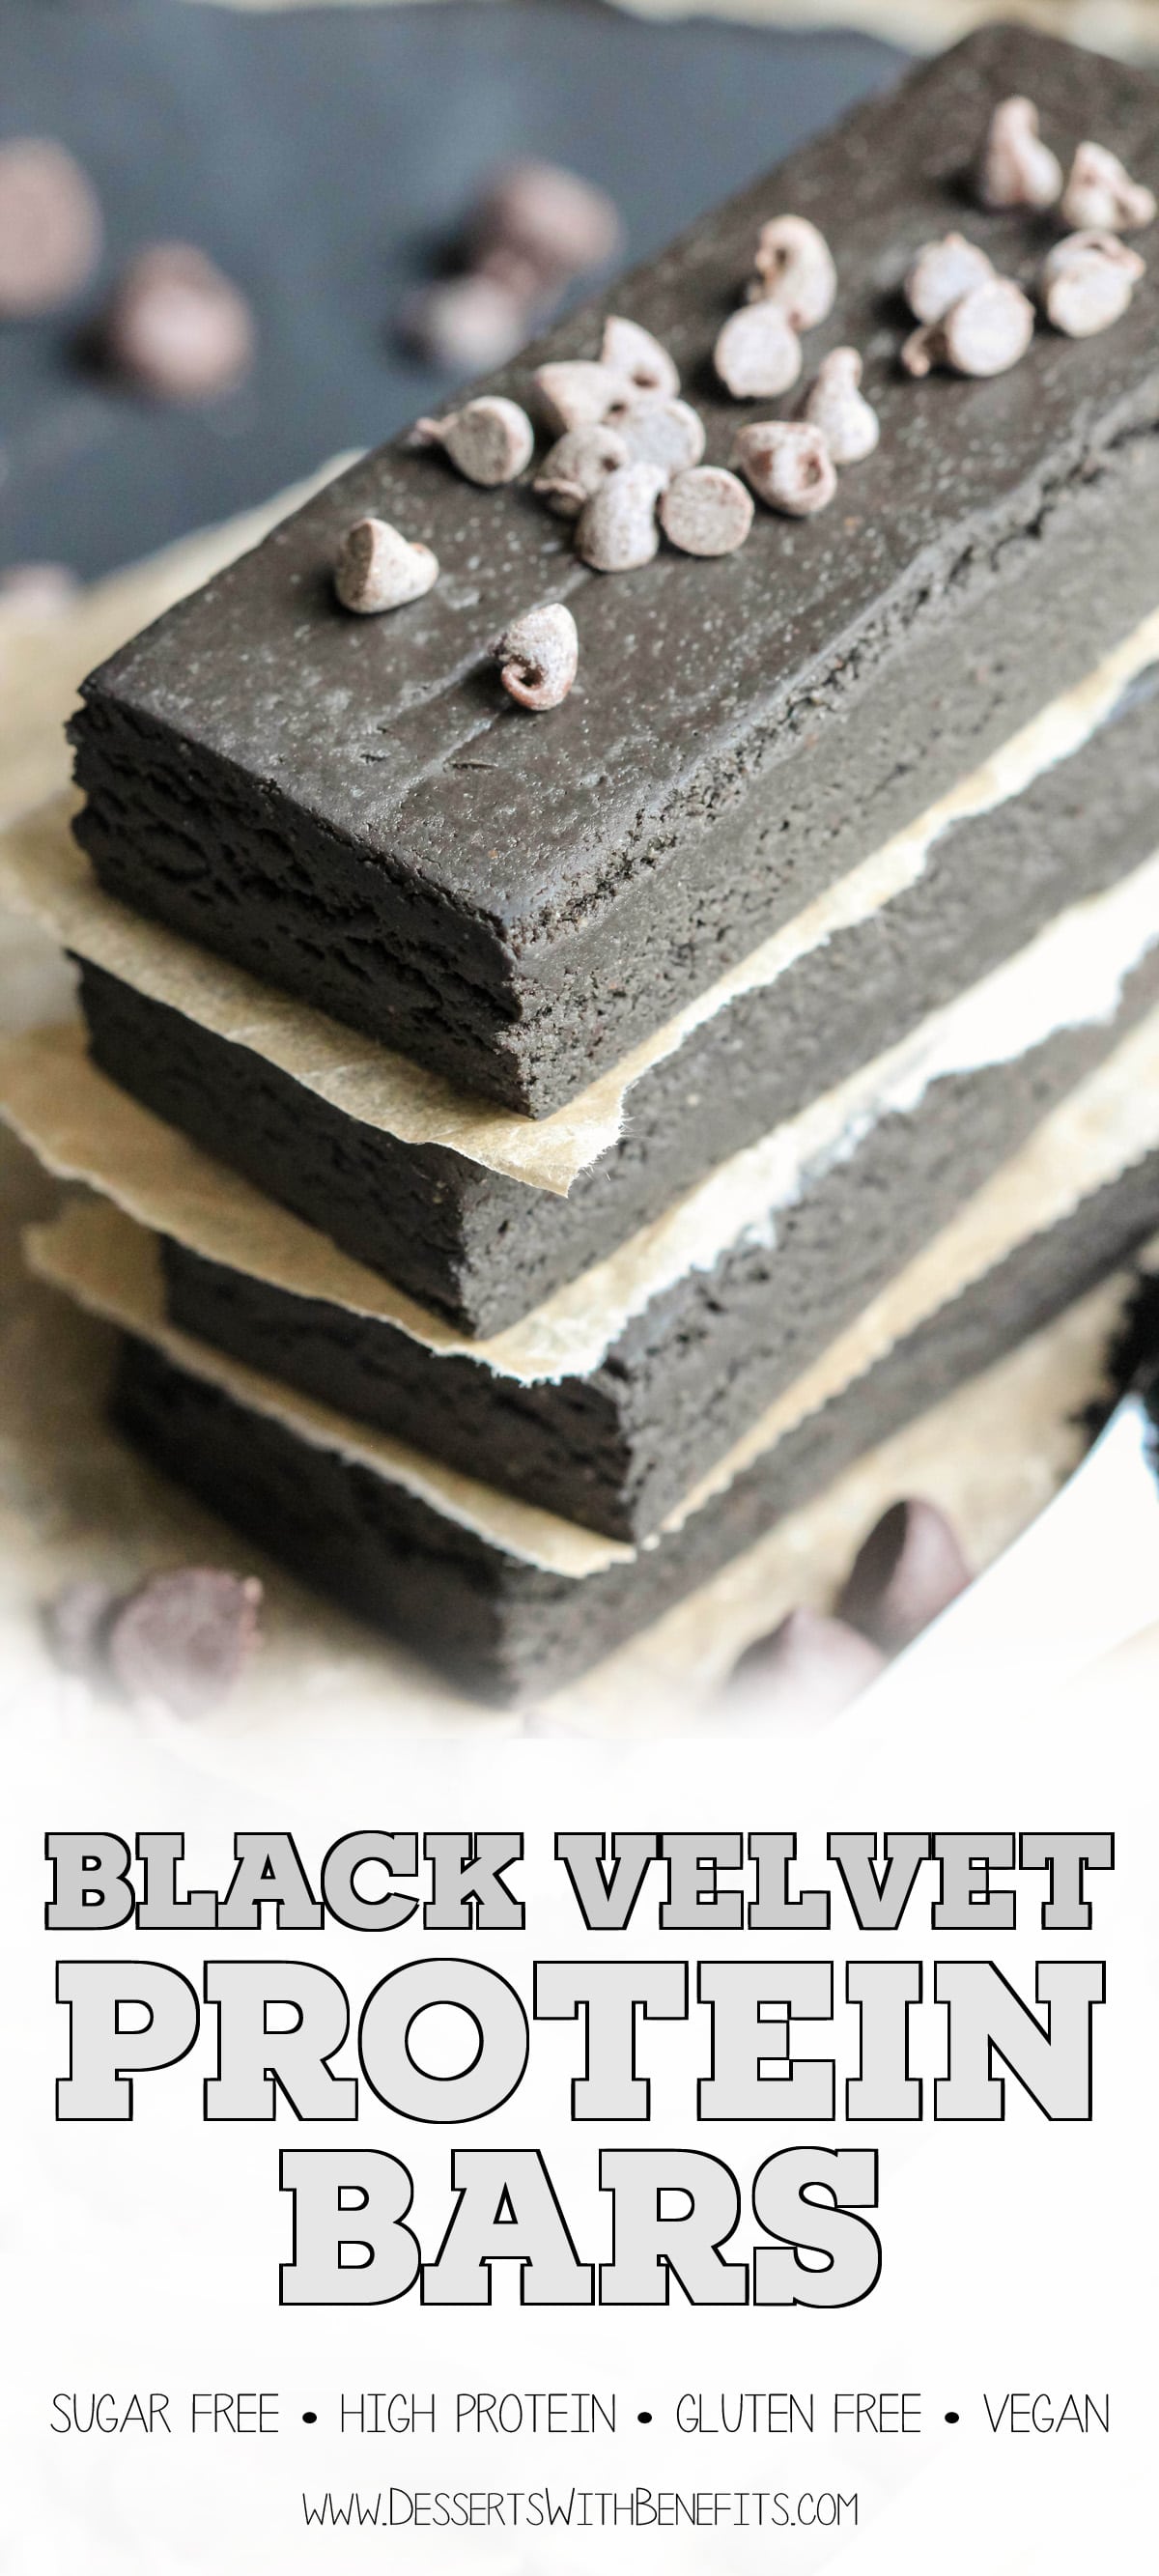 Black Velvet is just like red velvet, only black! These sweet, fudgy, chocolatey Healthy Black Velvet DIY Protein Bars are all natural, sugar free, high protein, gluten free, dairy free AND vegan, but you'd never know it. Can you guess the secret ingredient? -- Healthy Dessert Recipes with sugar free, low calorie, low fat, high protein, gluten free, dairy free, vegan, and raw options at the Desserts With Benefits Blog (www.DessertsWithBenefits.com)